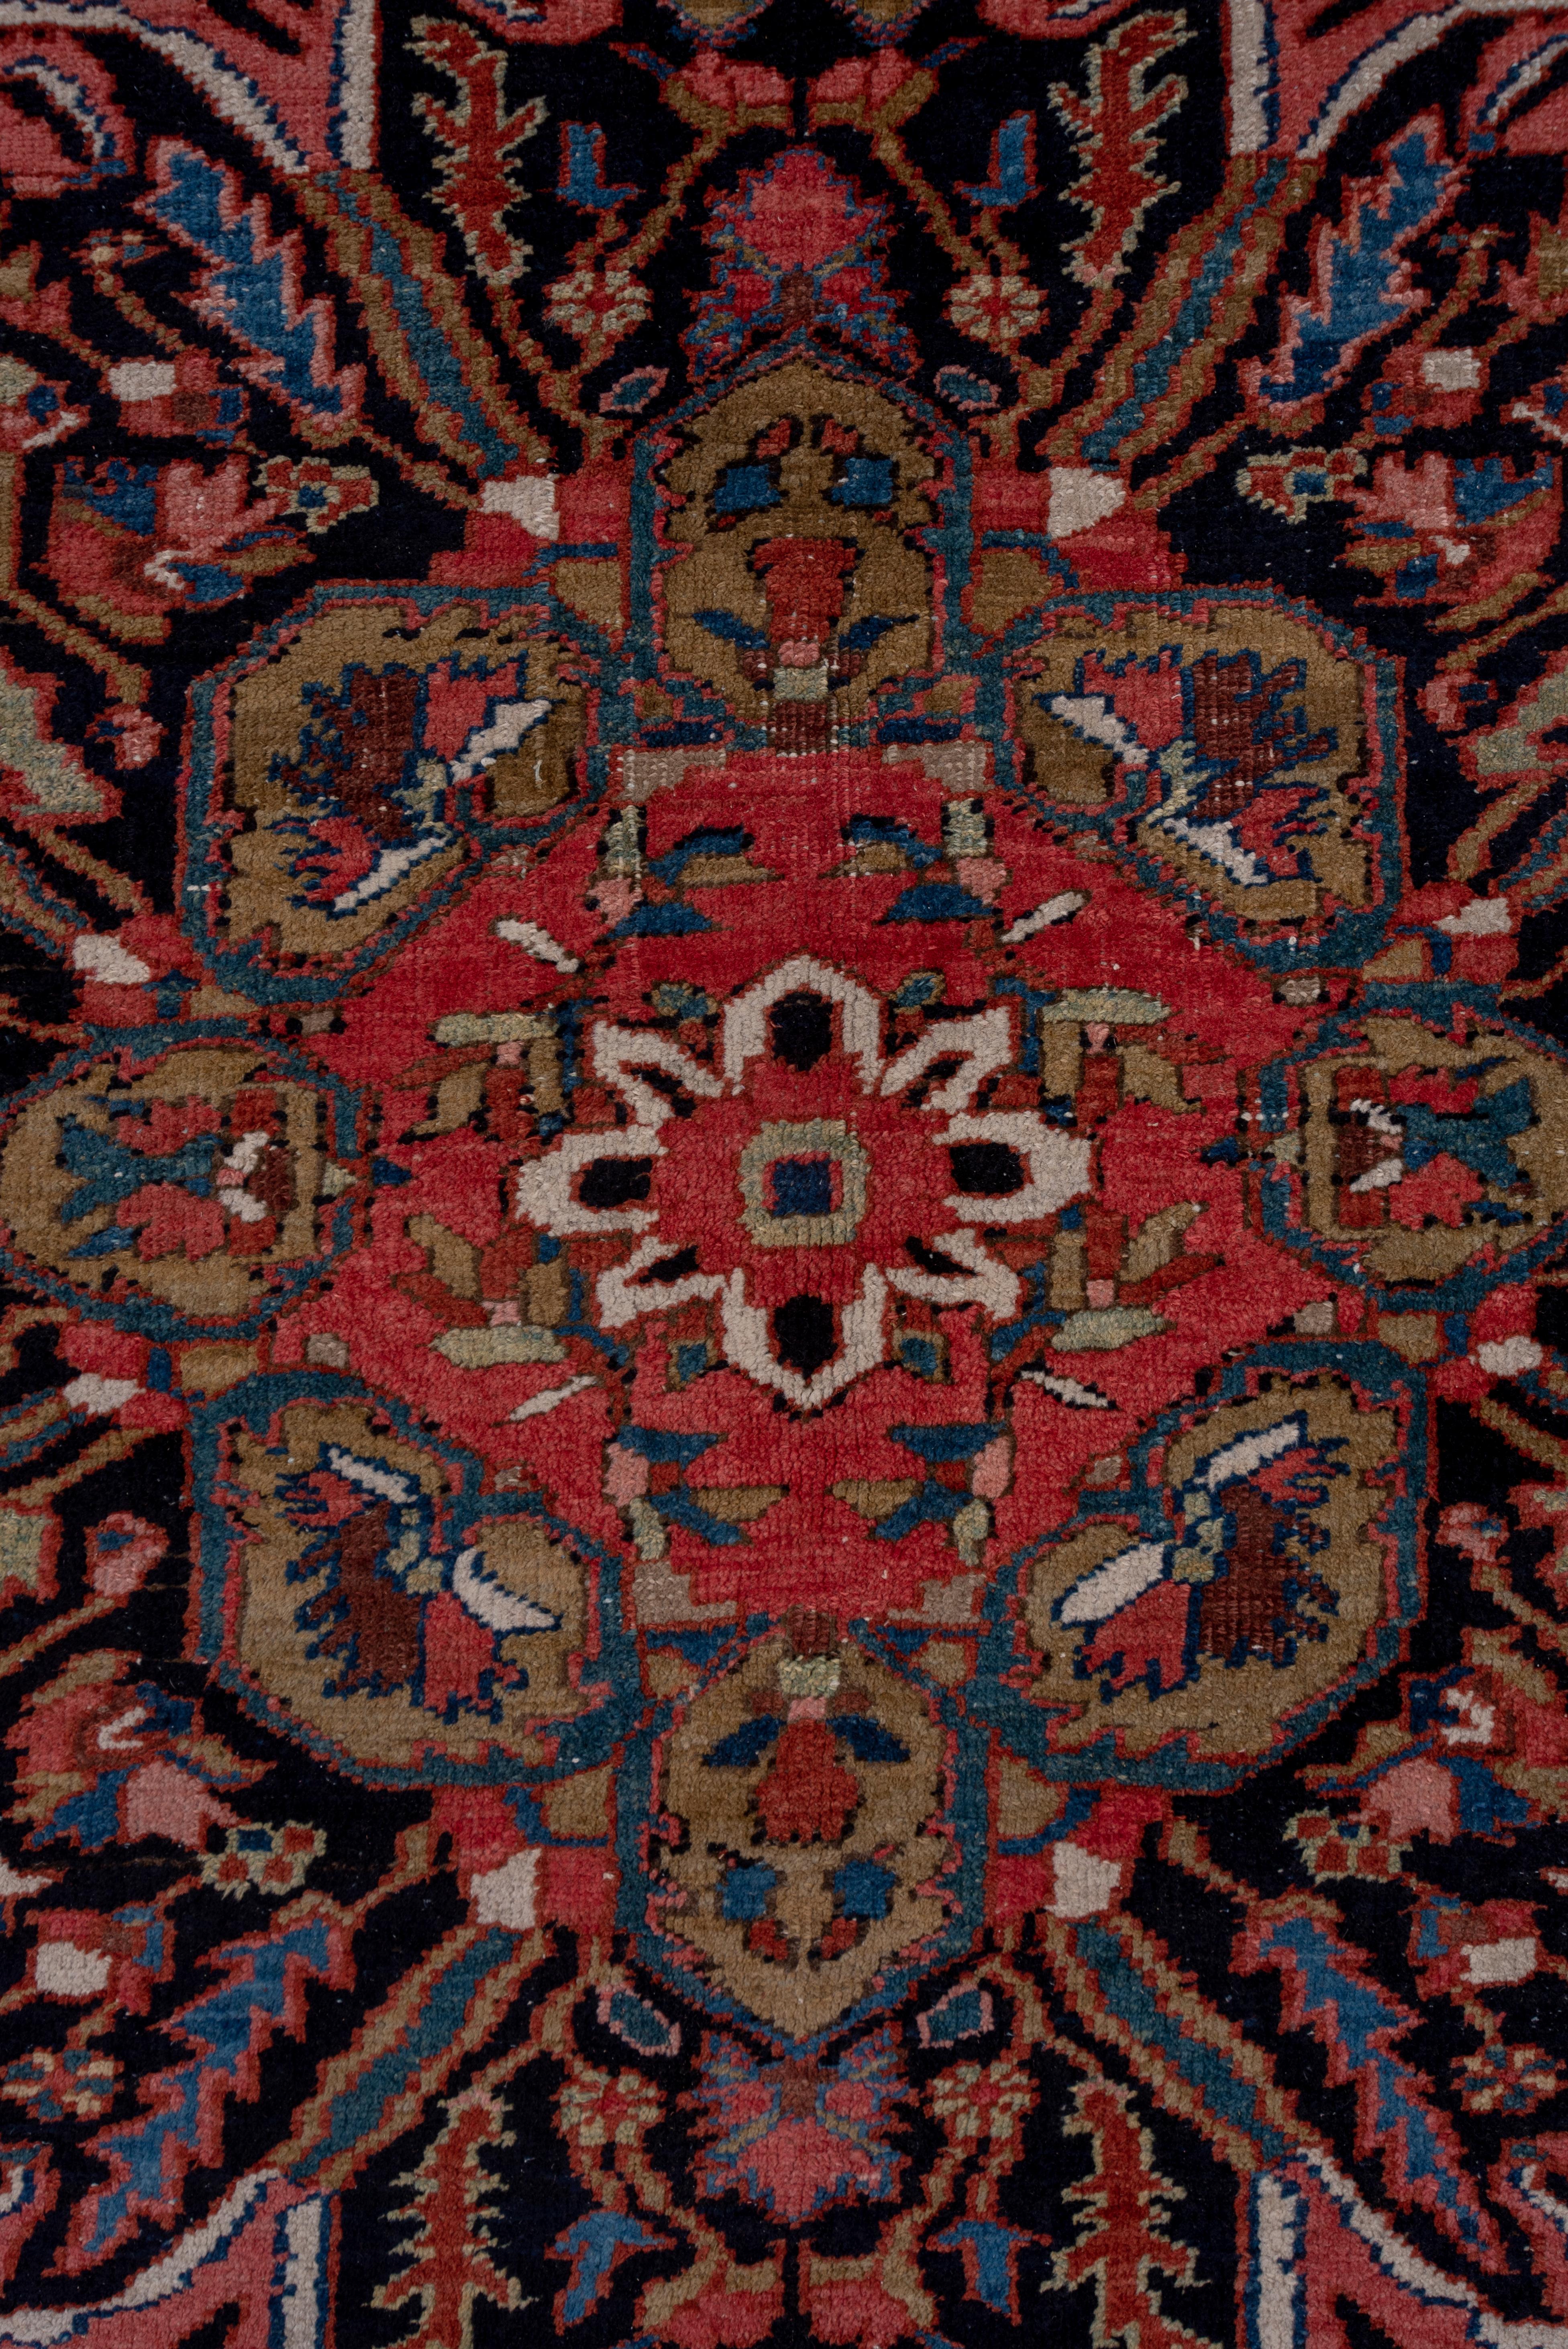 With very crisp colors, but with some spot worn areas, this solidly woven NW Persian village carpet shows the traditional madder red field centred by a deeply lobed octofoil medallion in navy, tonally matching the bent leaf and rosette main border.